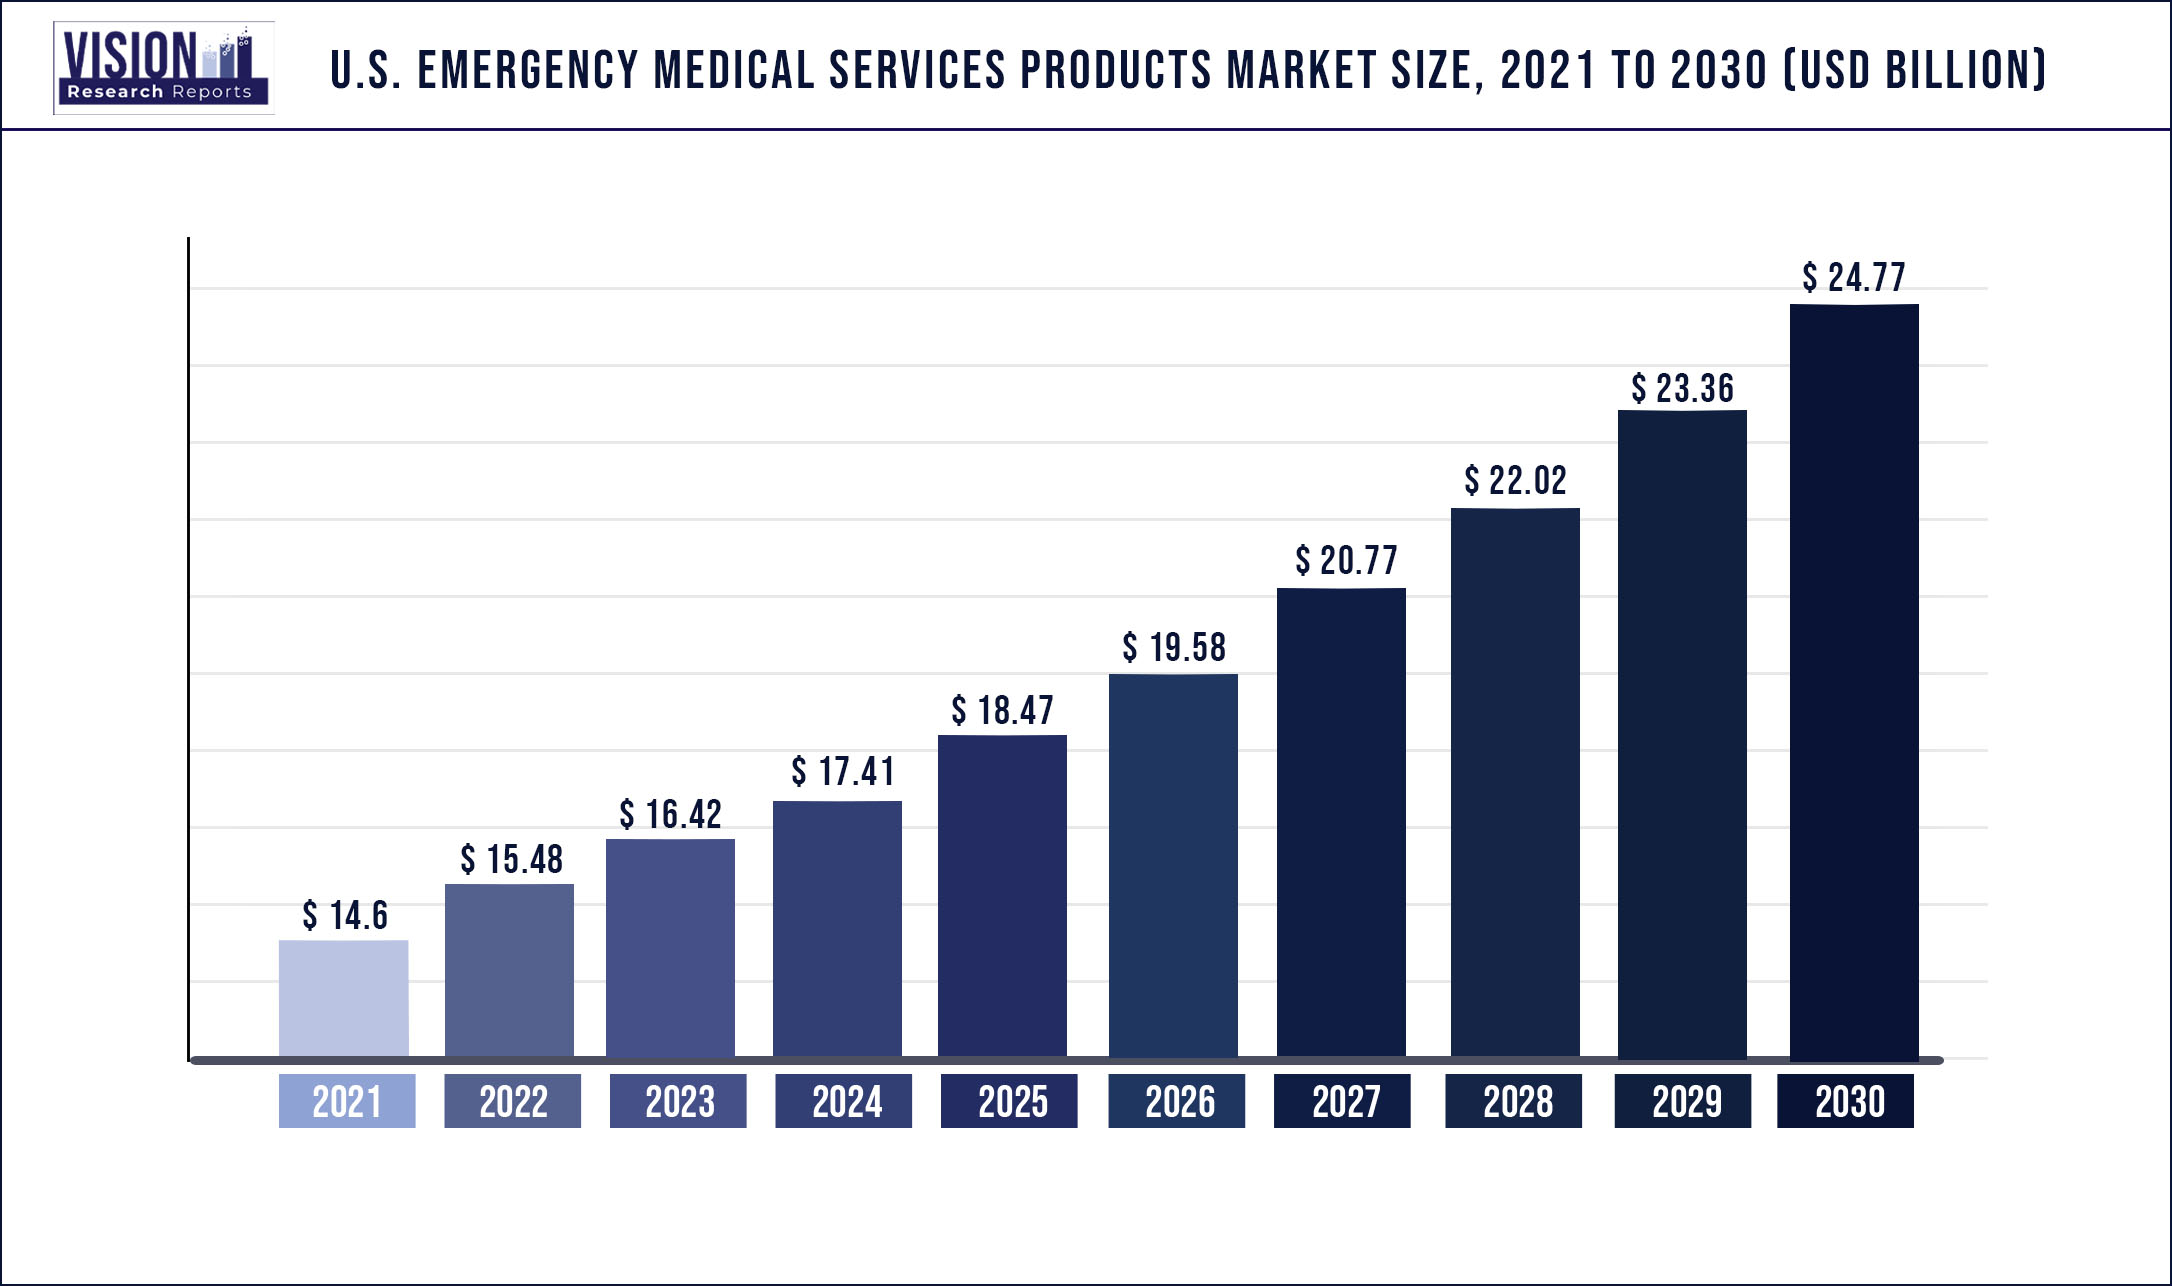 U.S. Emergency Medical Services Products Market Size 2021 to 2030